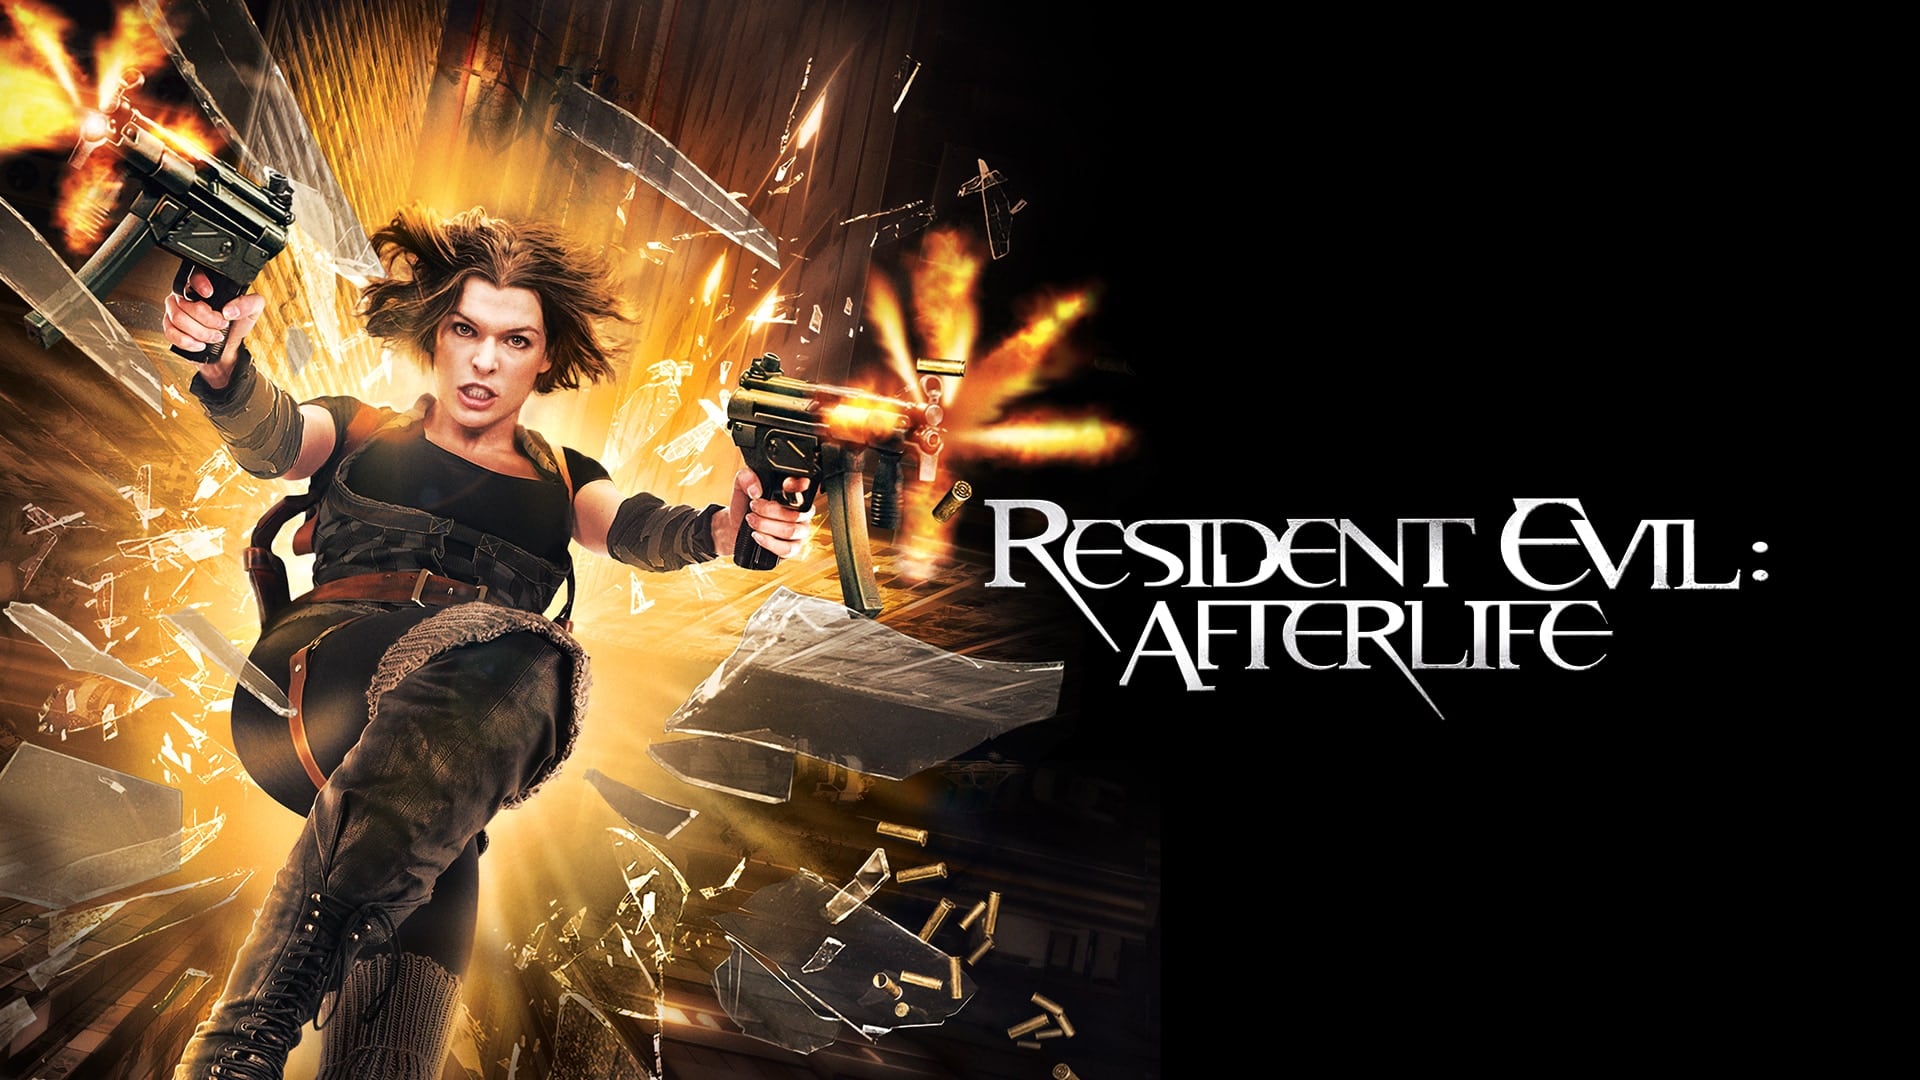 Watch Resident Evil: Afterlife Online | Stream Full Movies